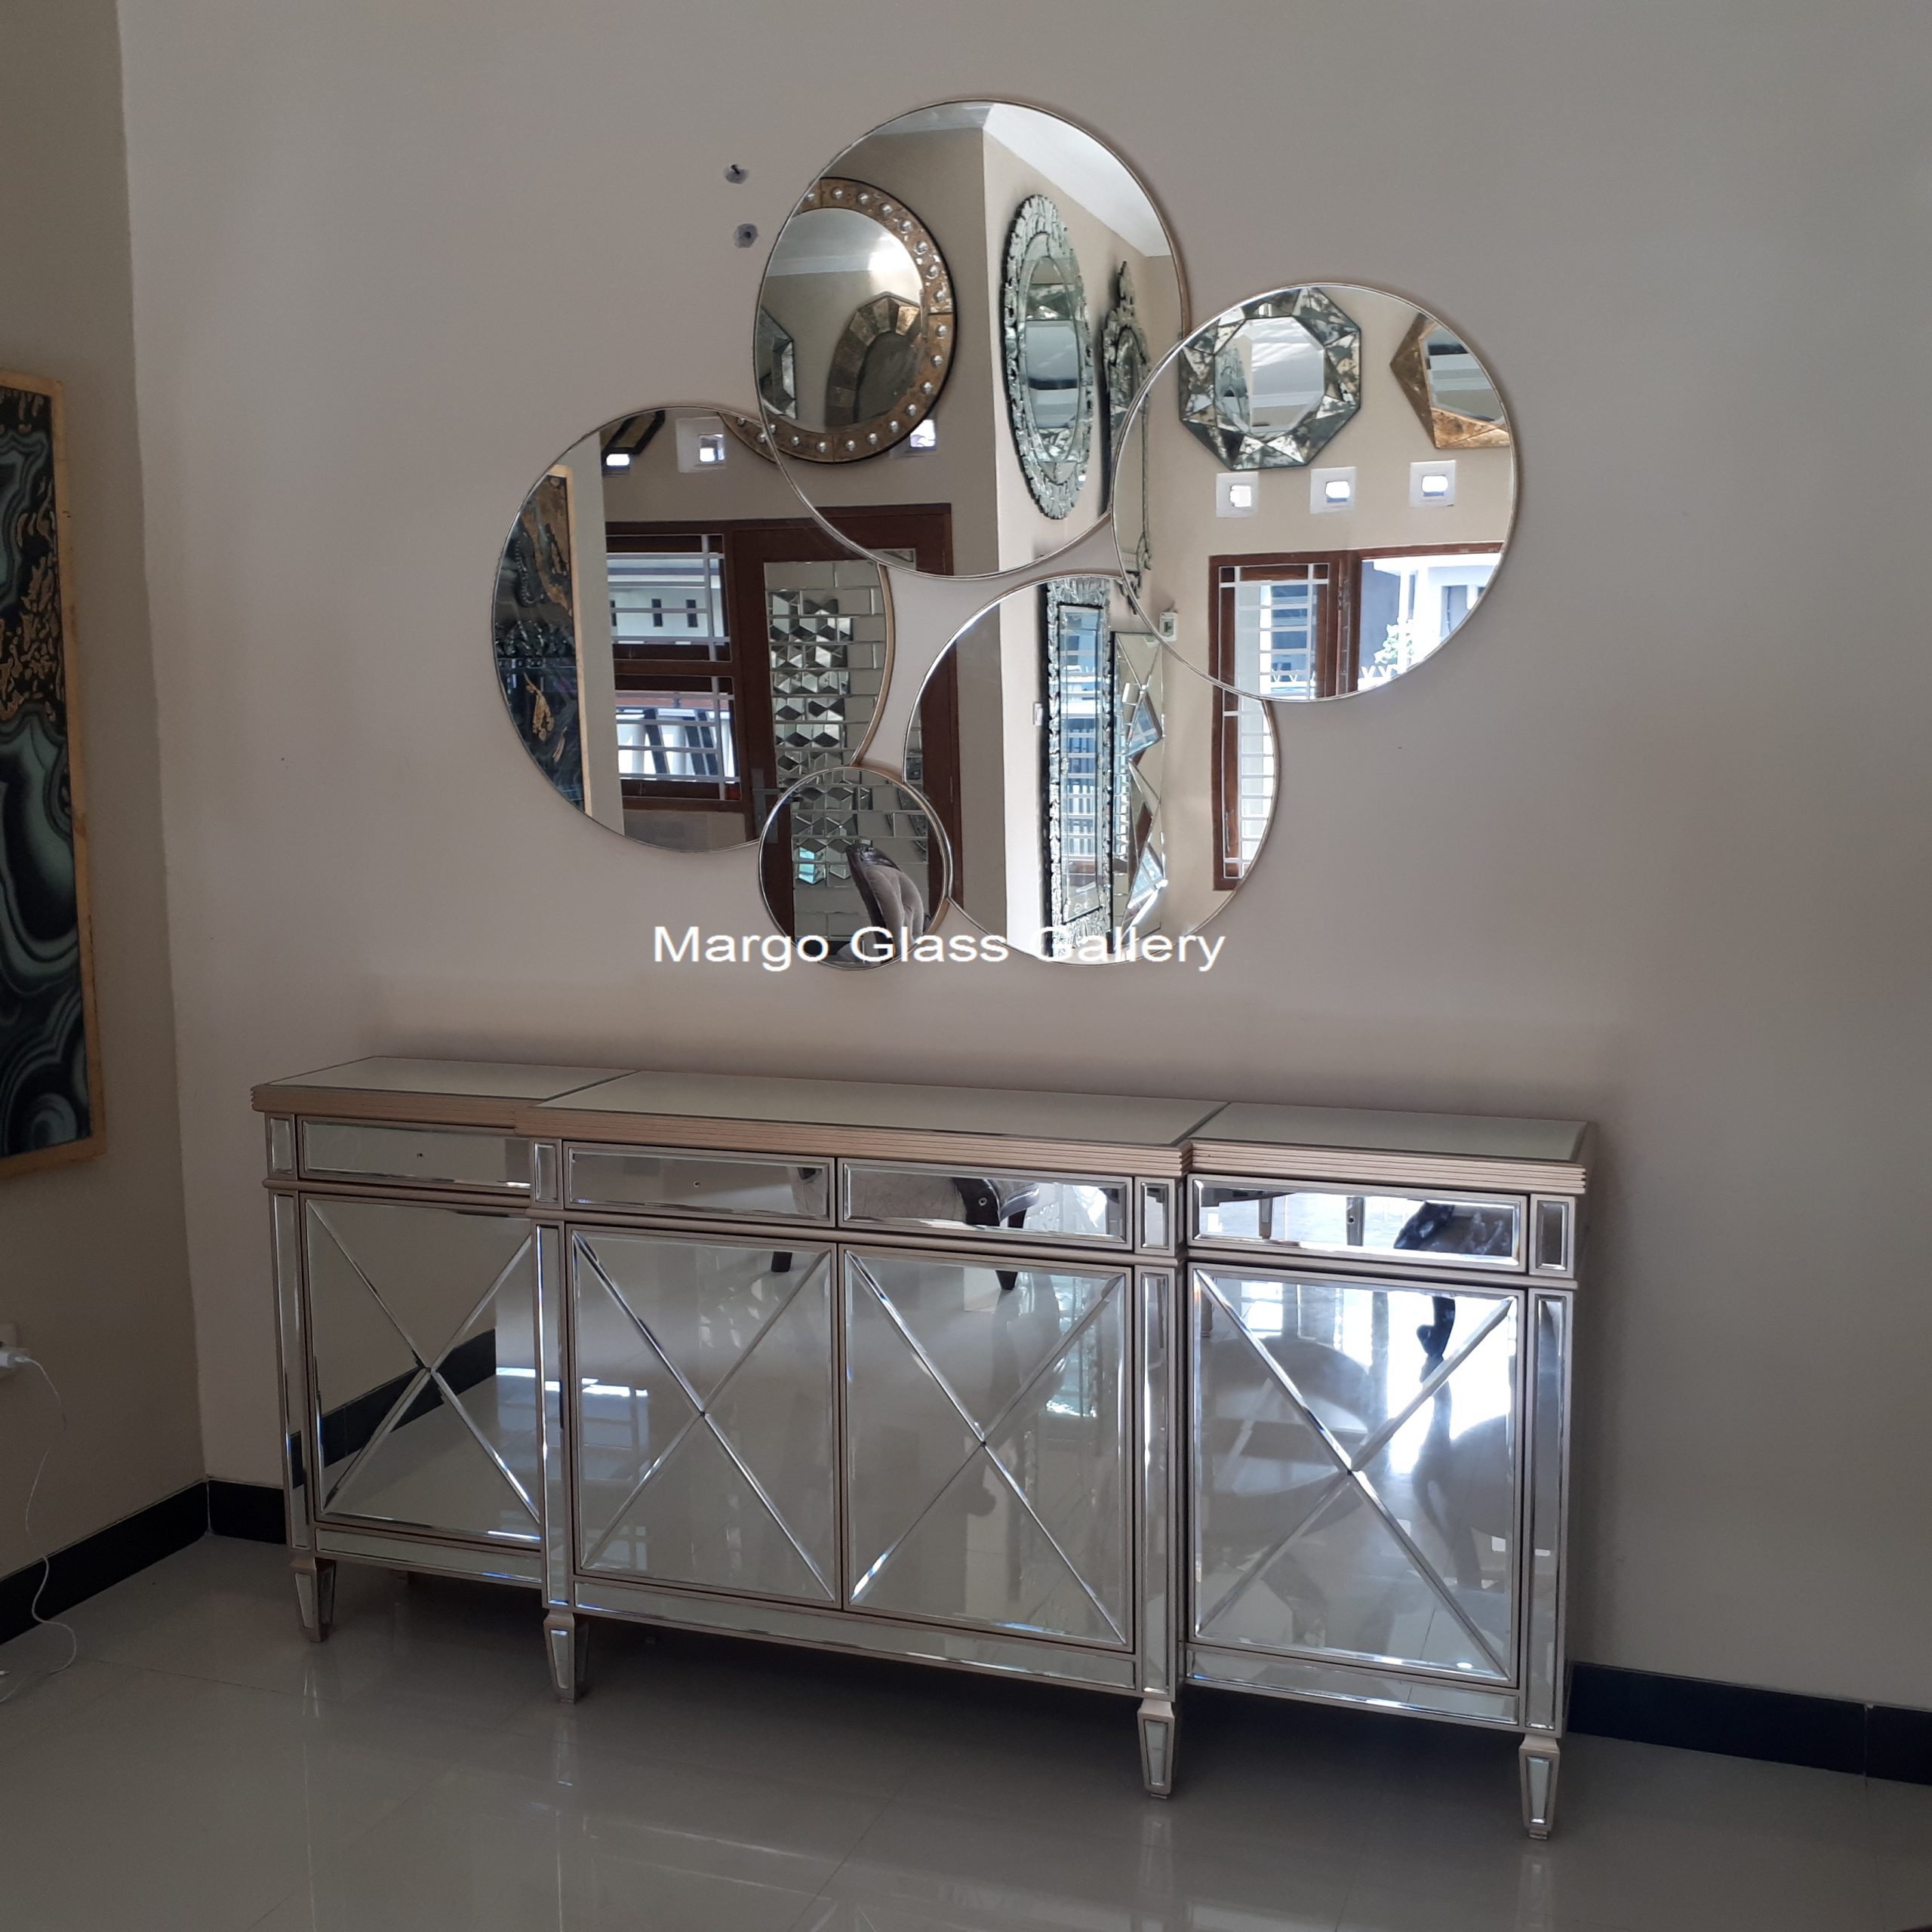 The Advantages of MargoVenetianMirror.com as an Antique Mirror Company, Quality and Trusted!